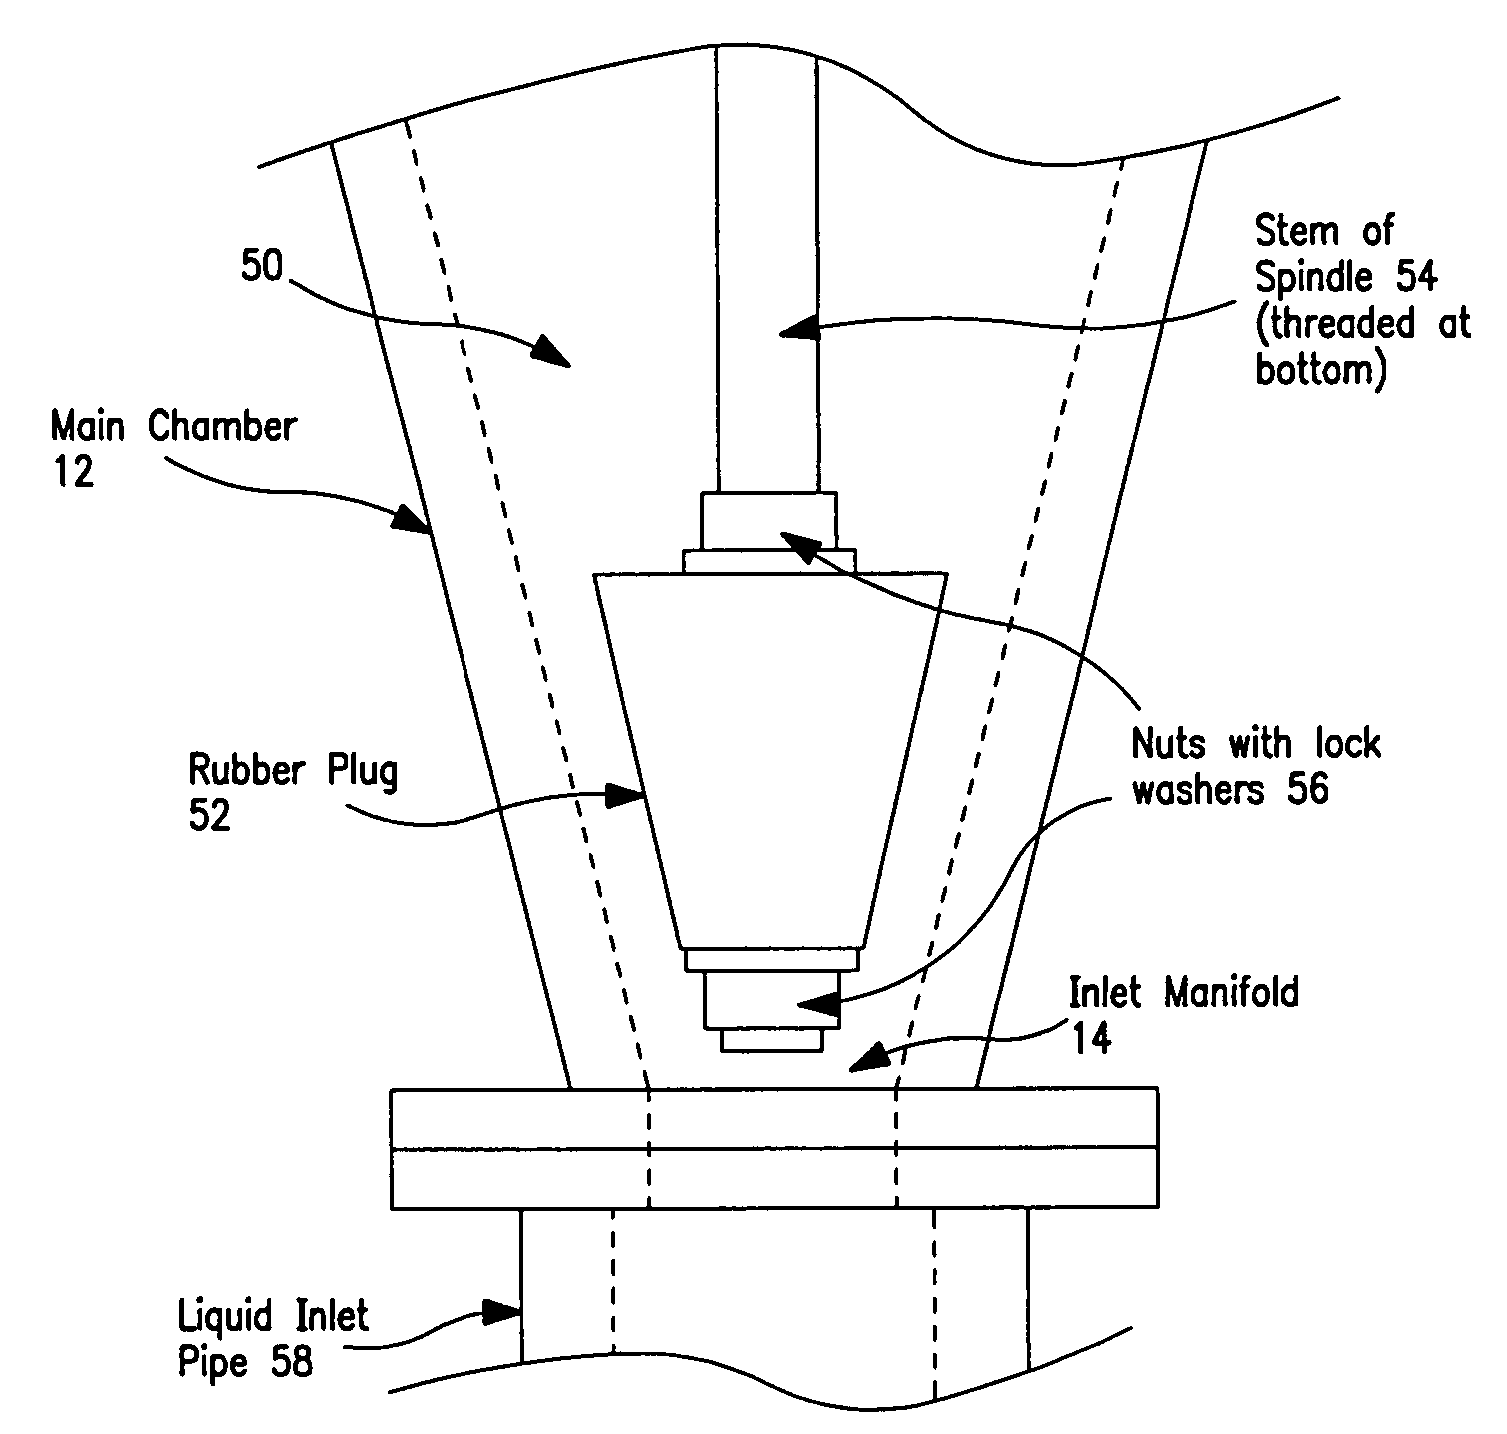 Apparatus and method for removing phosphorus from waste lagoon effluent